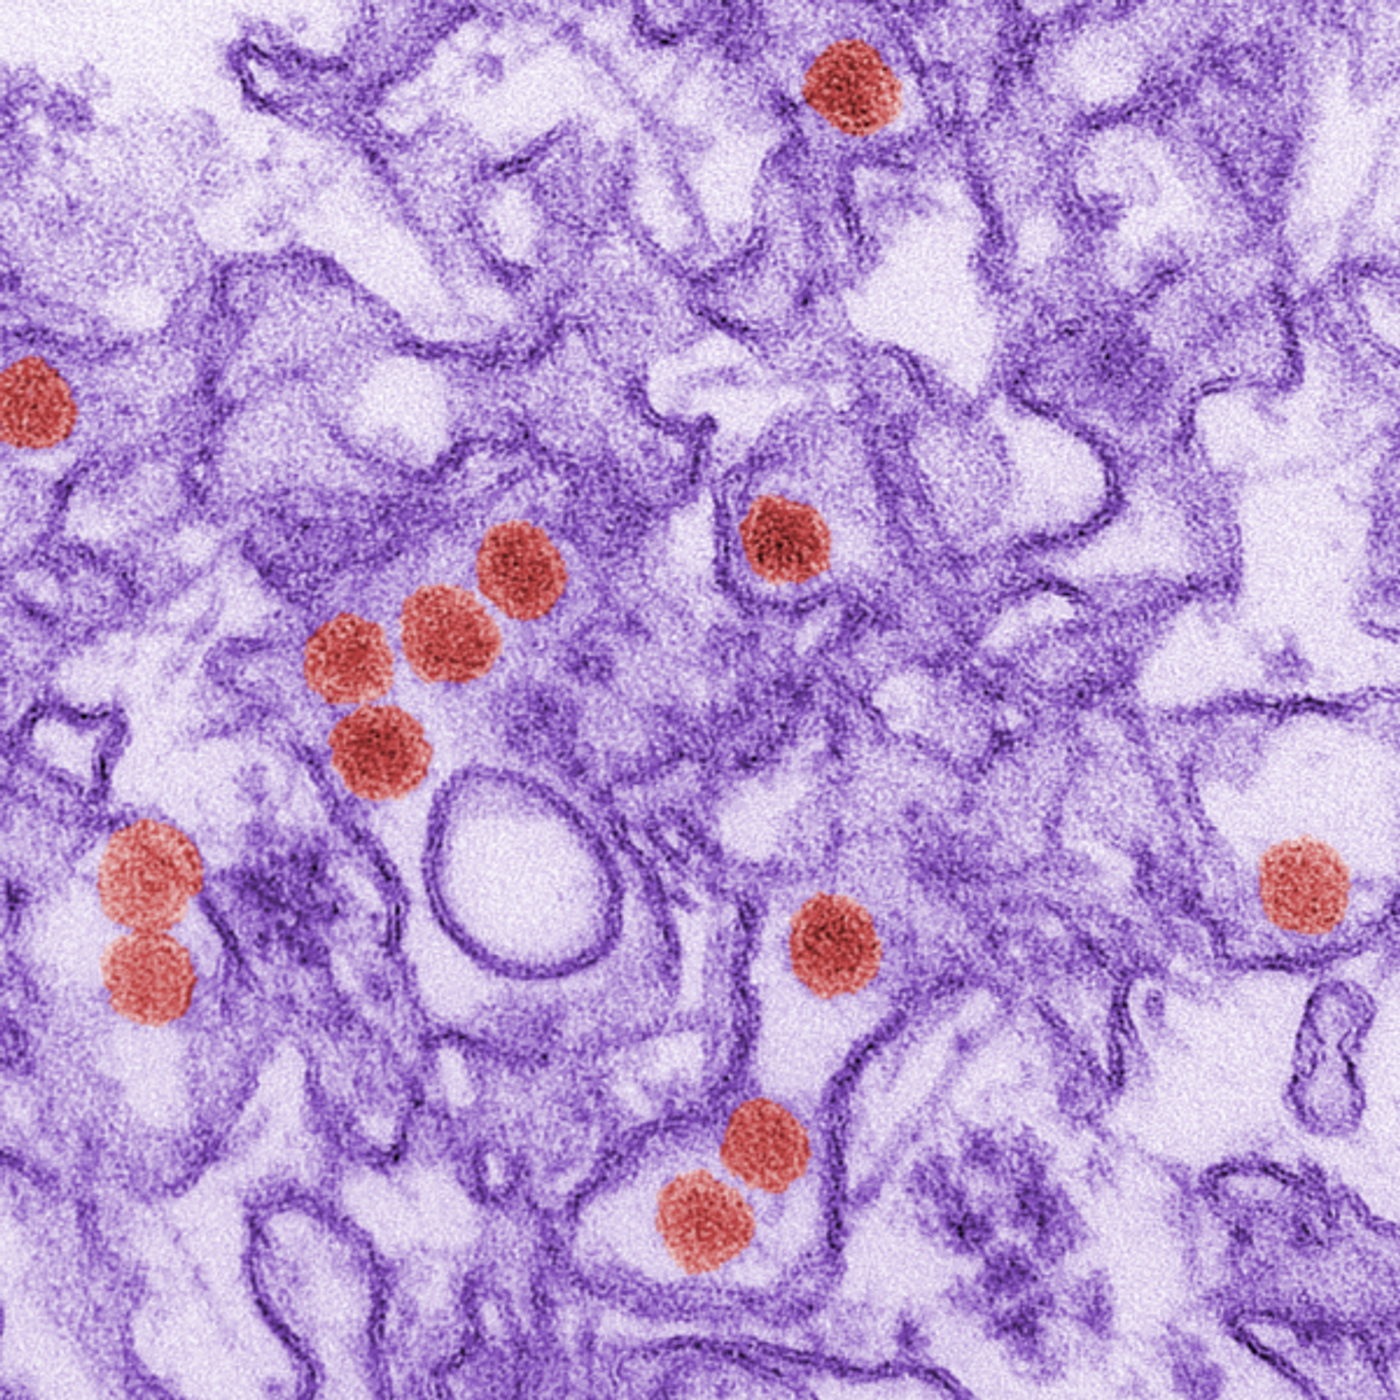 A digitally-colorized transmission electron micrograph of Zika virus, which is a member of the family Flaviviridae. Virus particles are colored red,